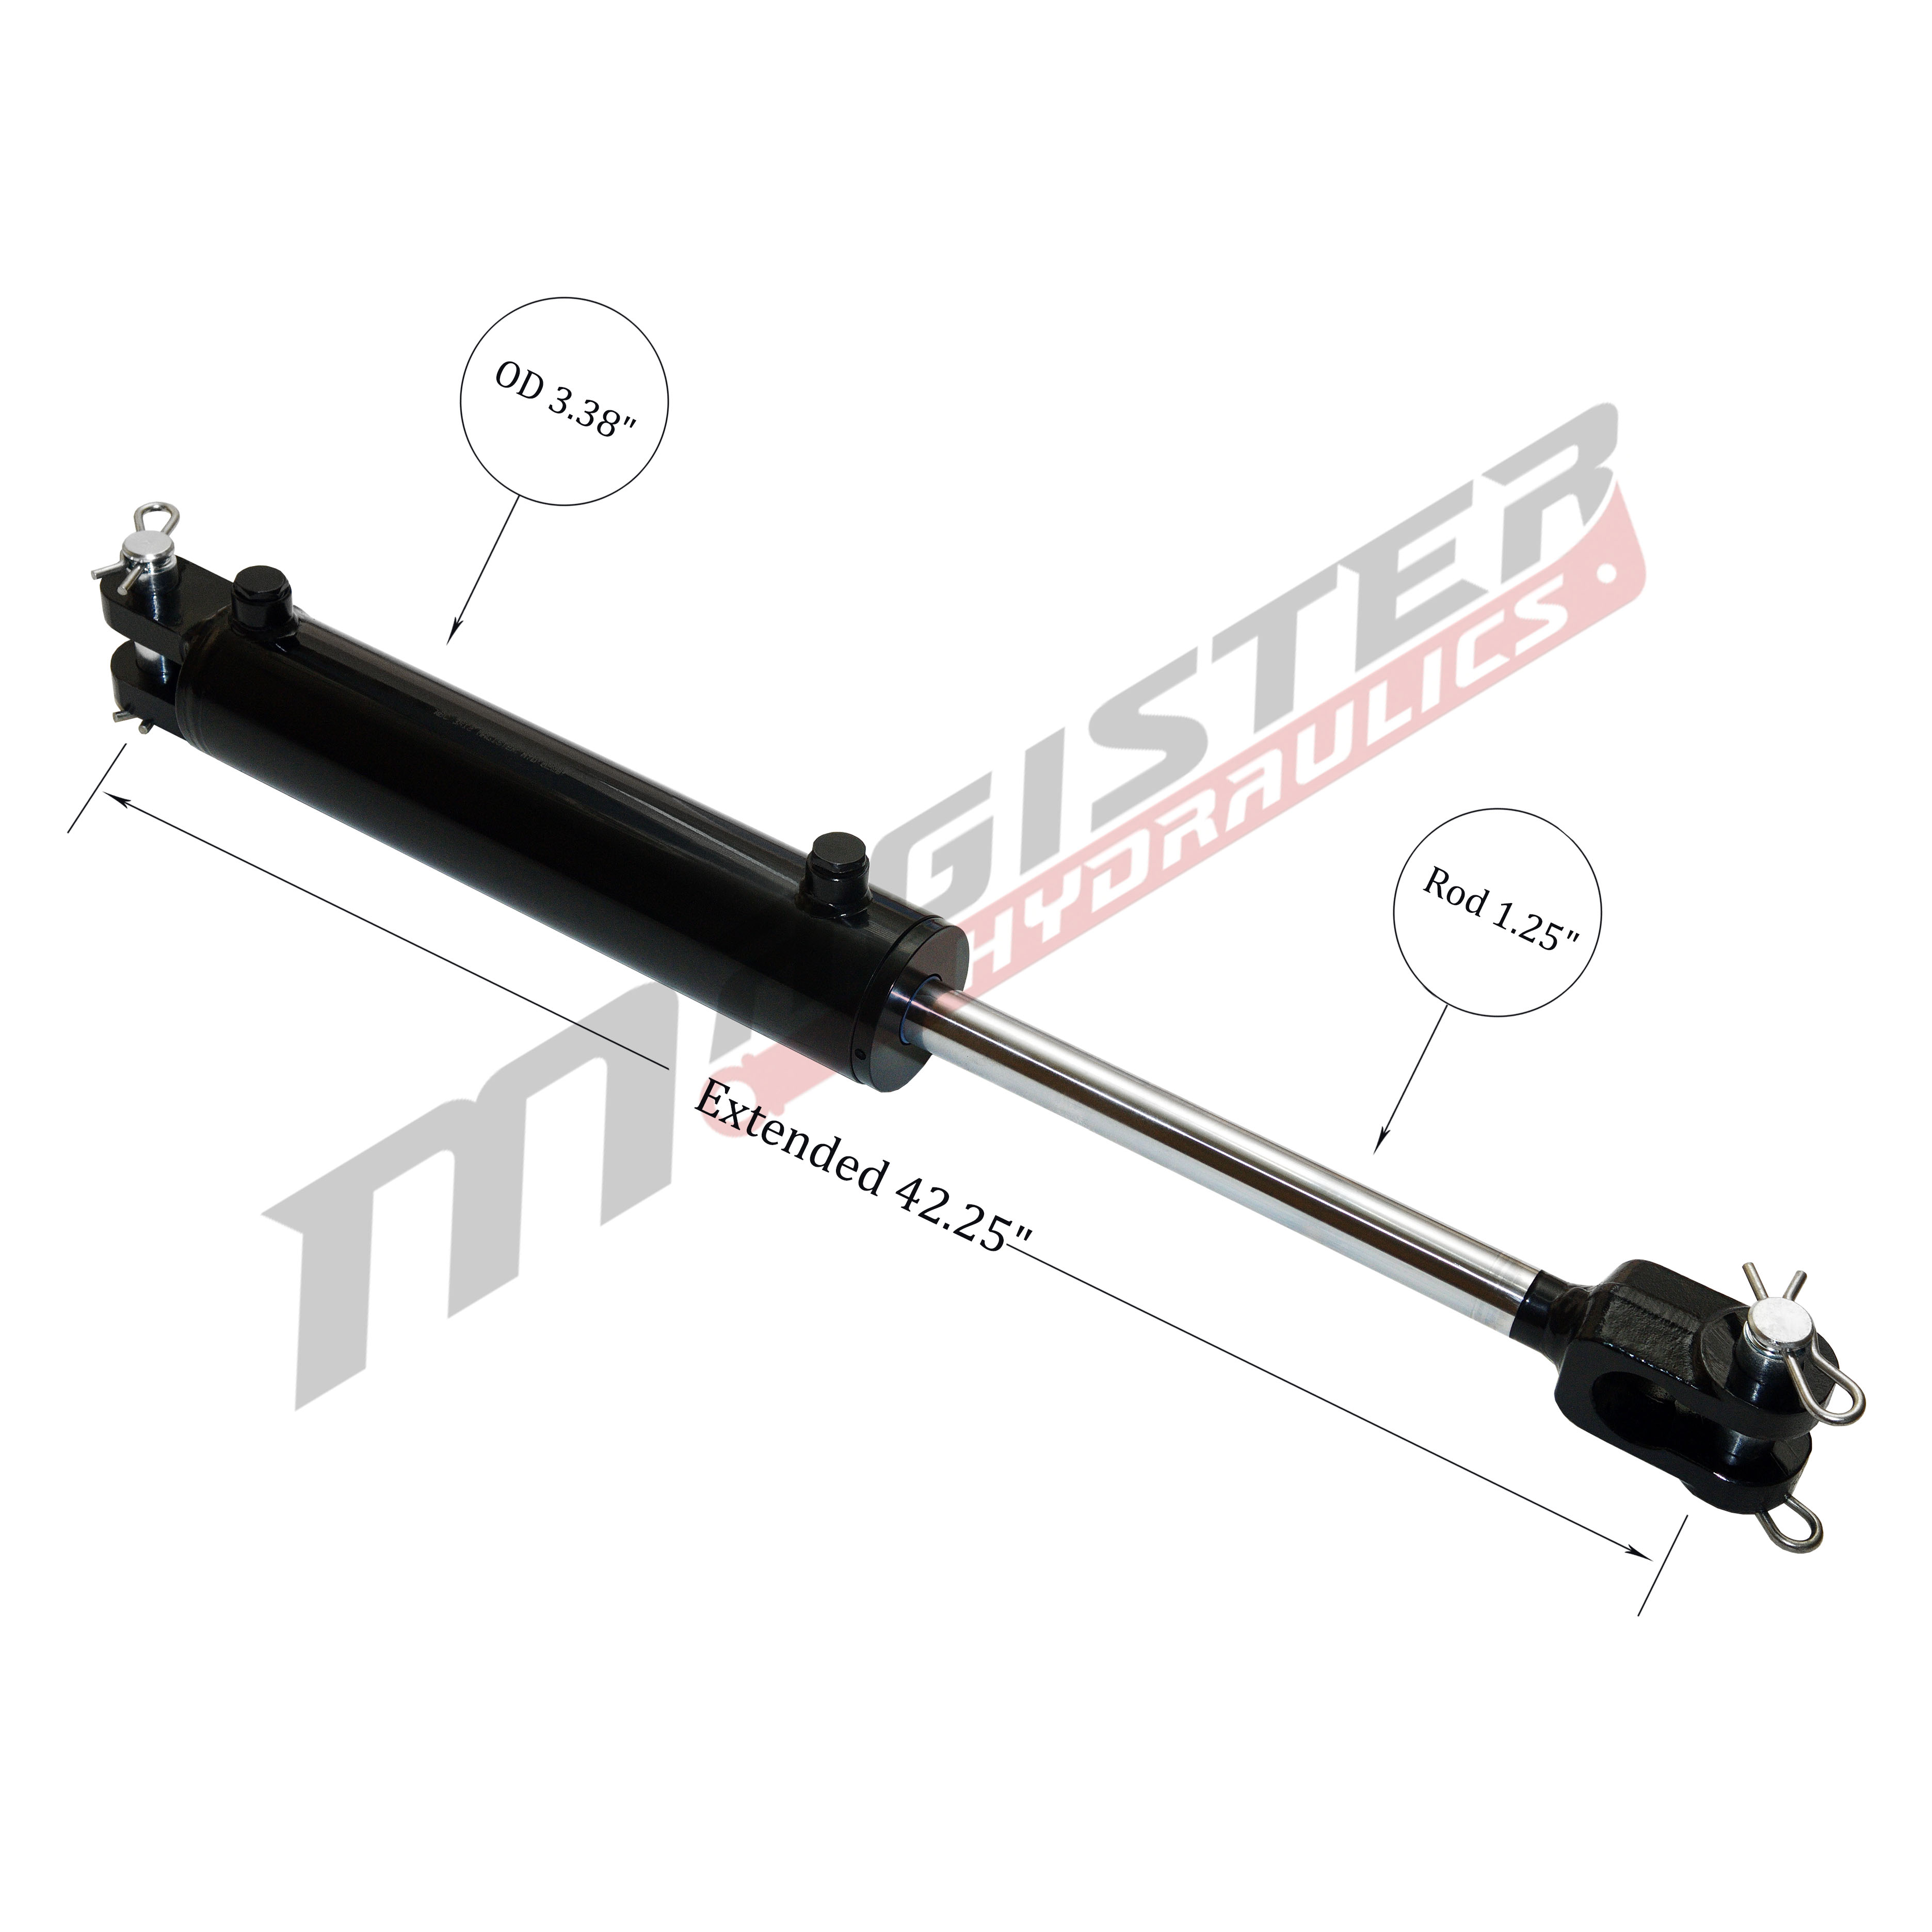 3 bore x 16 stroke hydraulic cylinder, ag clevis double acting cylinder | Magister Hydraulics